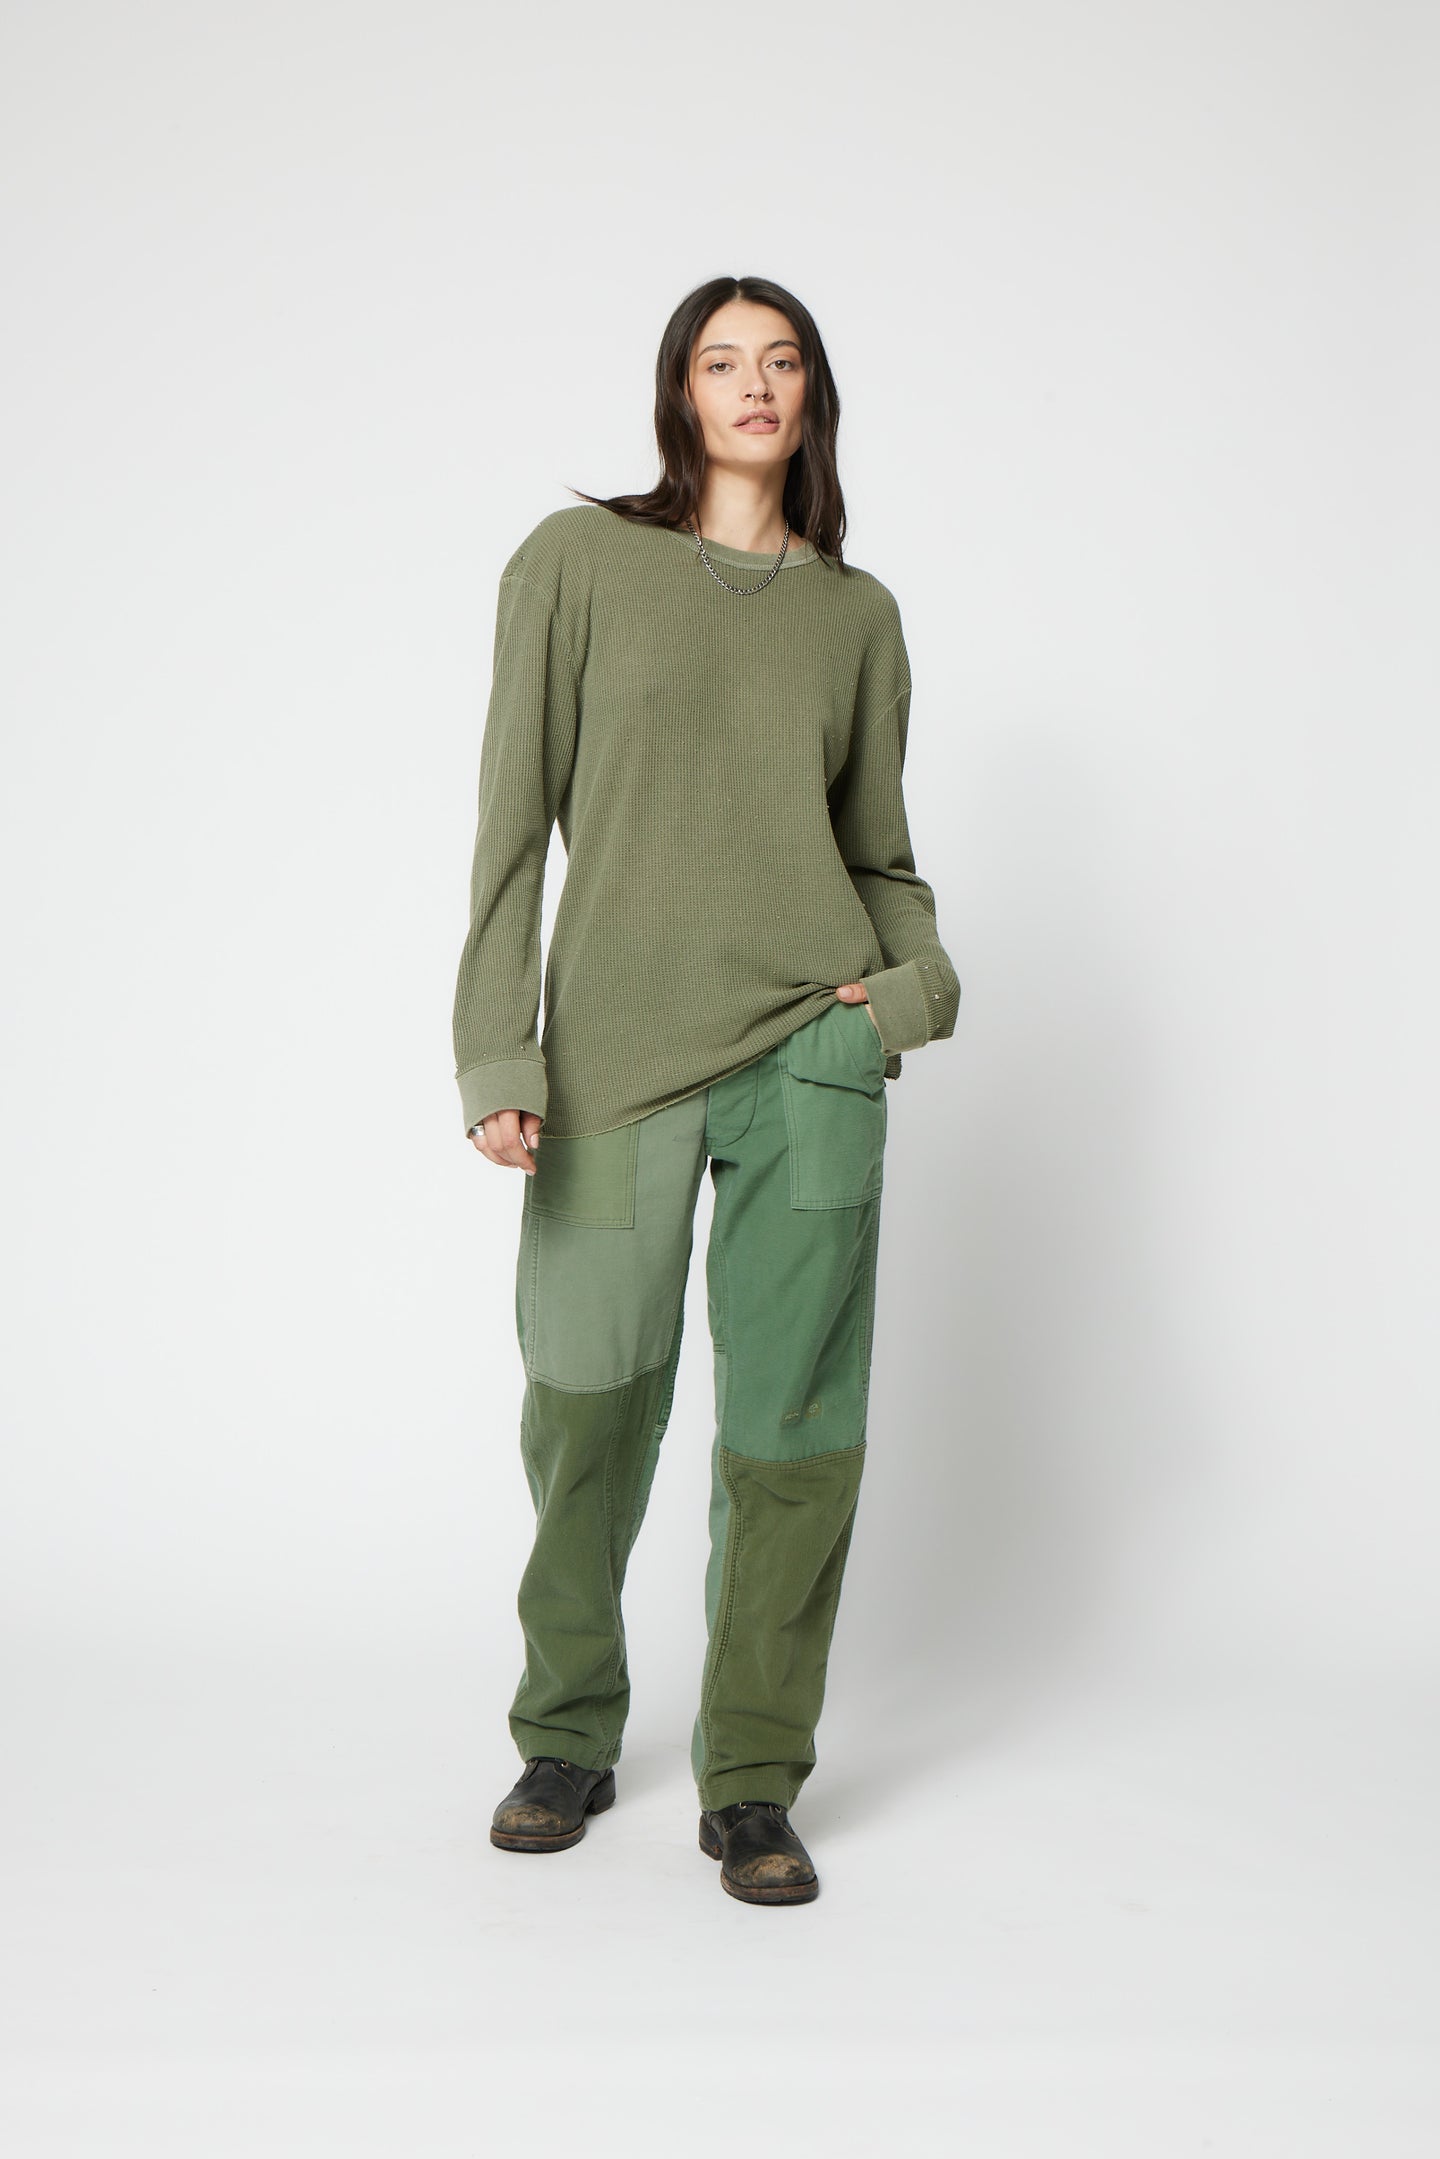 SRPLS MILITARY PATCH BAKER PANT / ARMY PATCHWORK